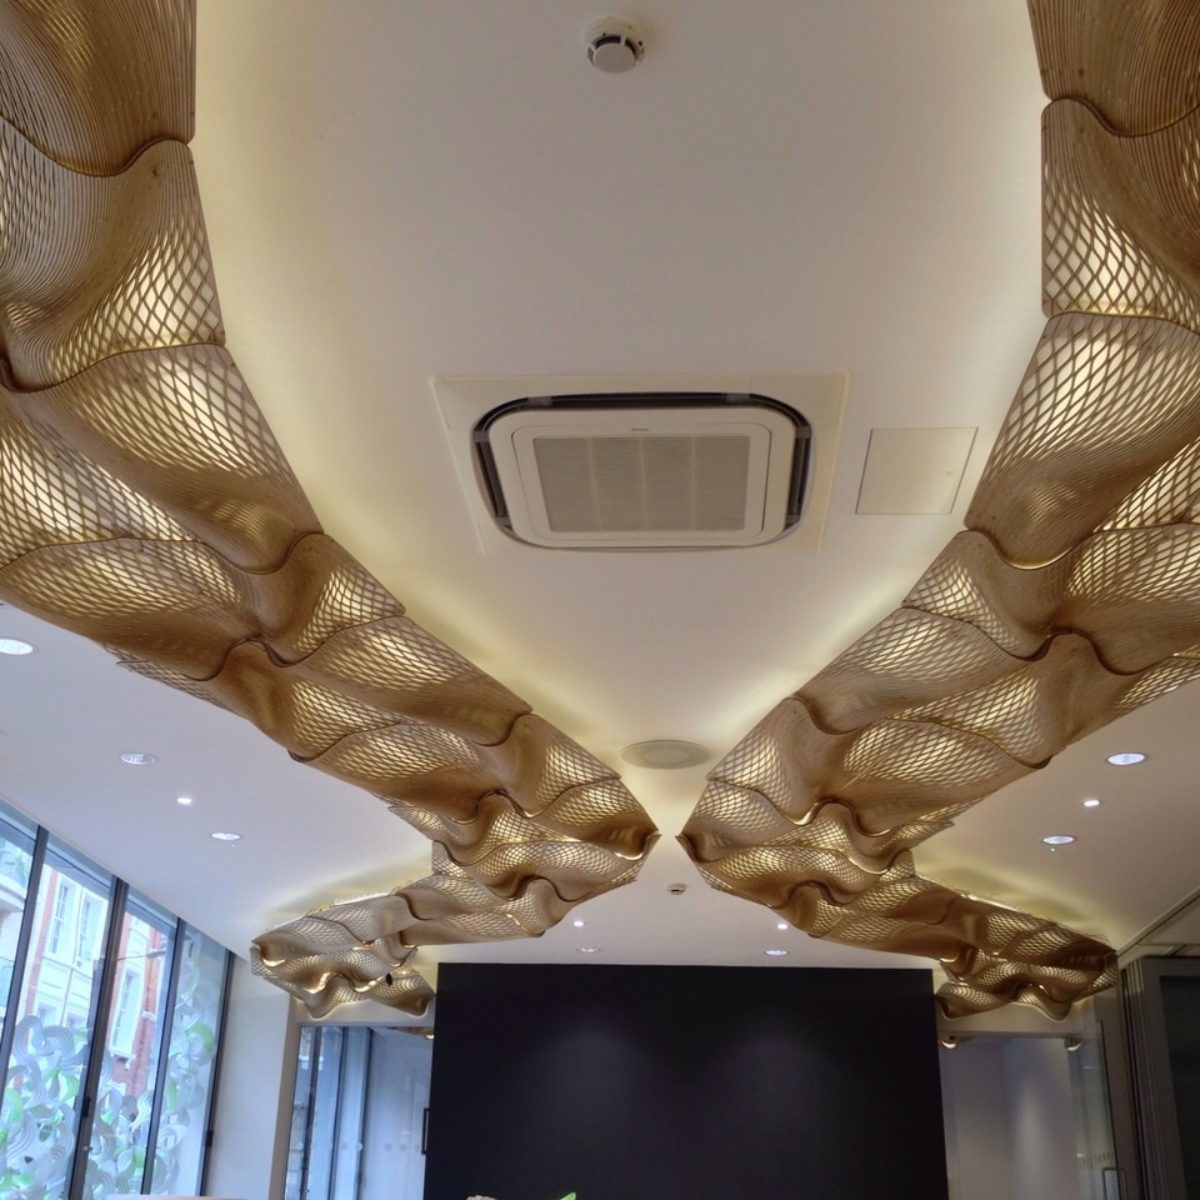 The Wooden Waves - Buro Happold - The ceiling Installation at 71 Newman Street - Picture by Bilal Mian ©Mamou-Mani